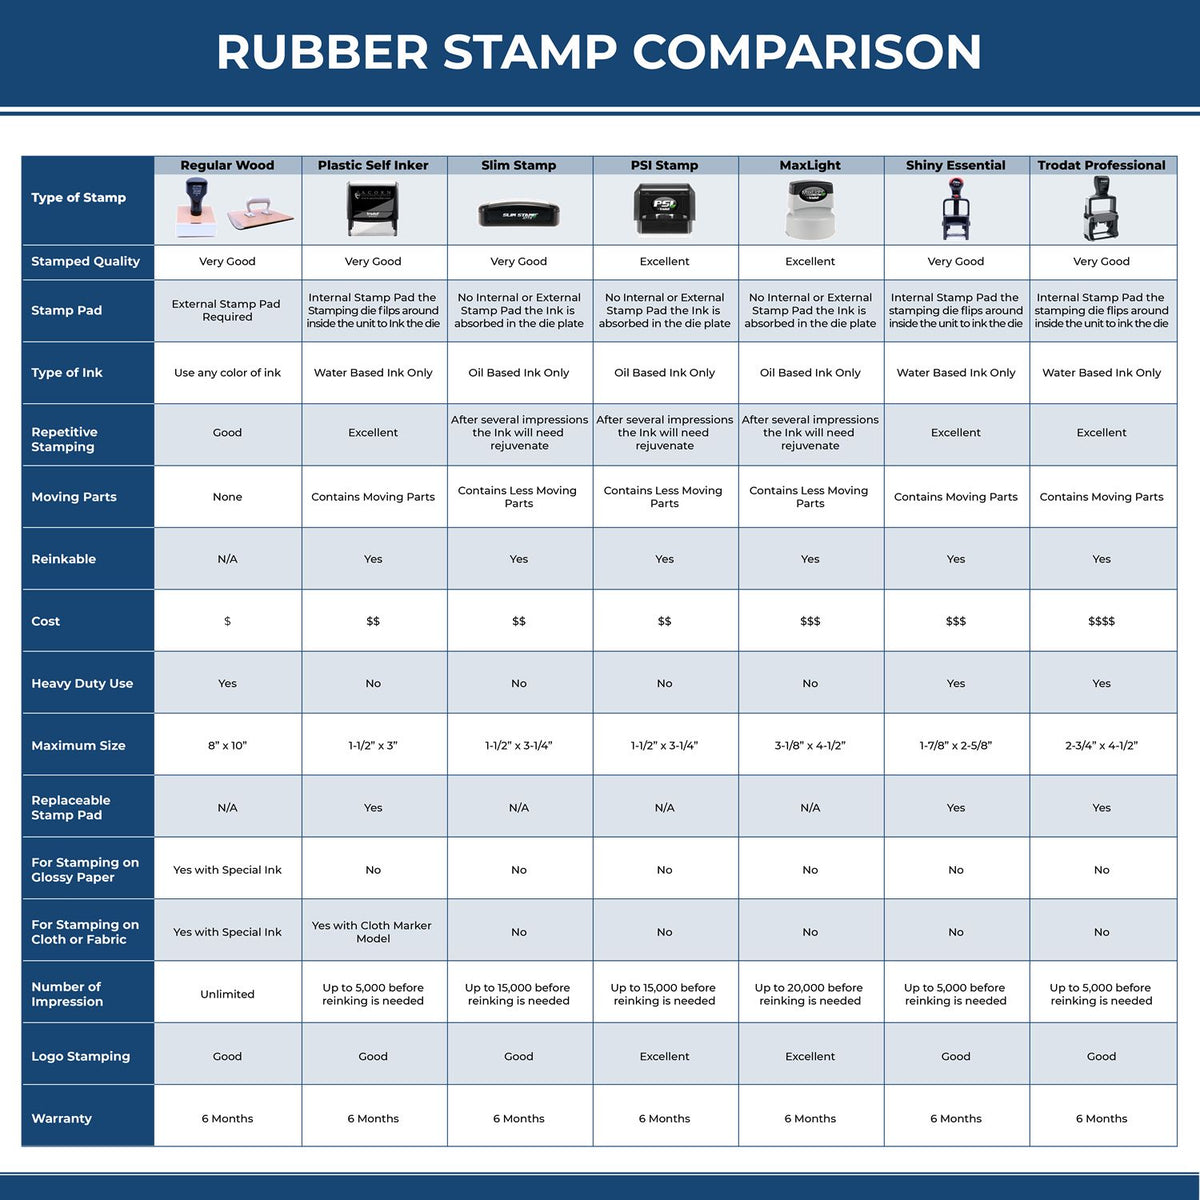 A comparison chart for the different types of mount models available for the Premium MaxLight Pre-Inked Minnesota Engineering Stamp.